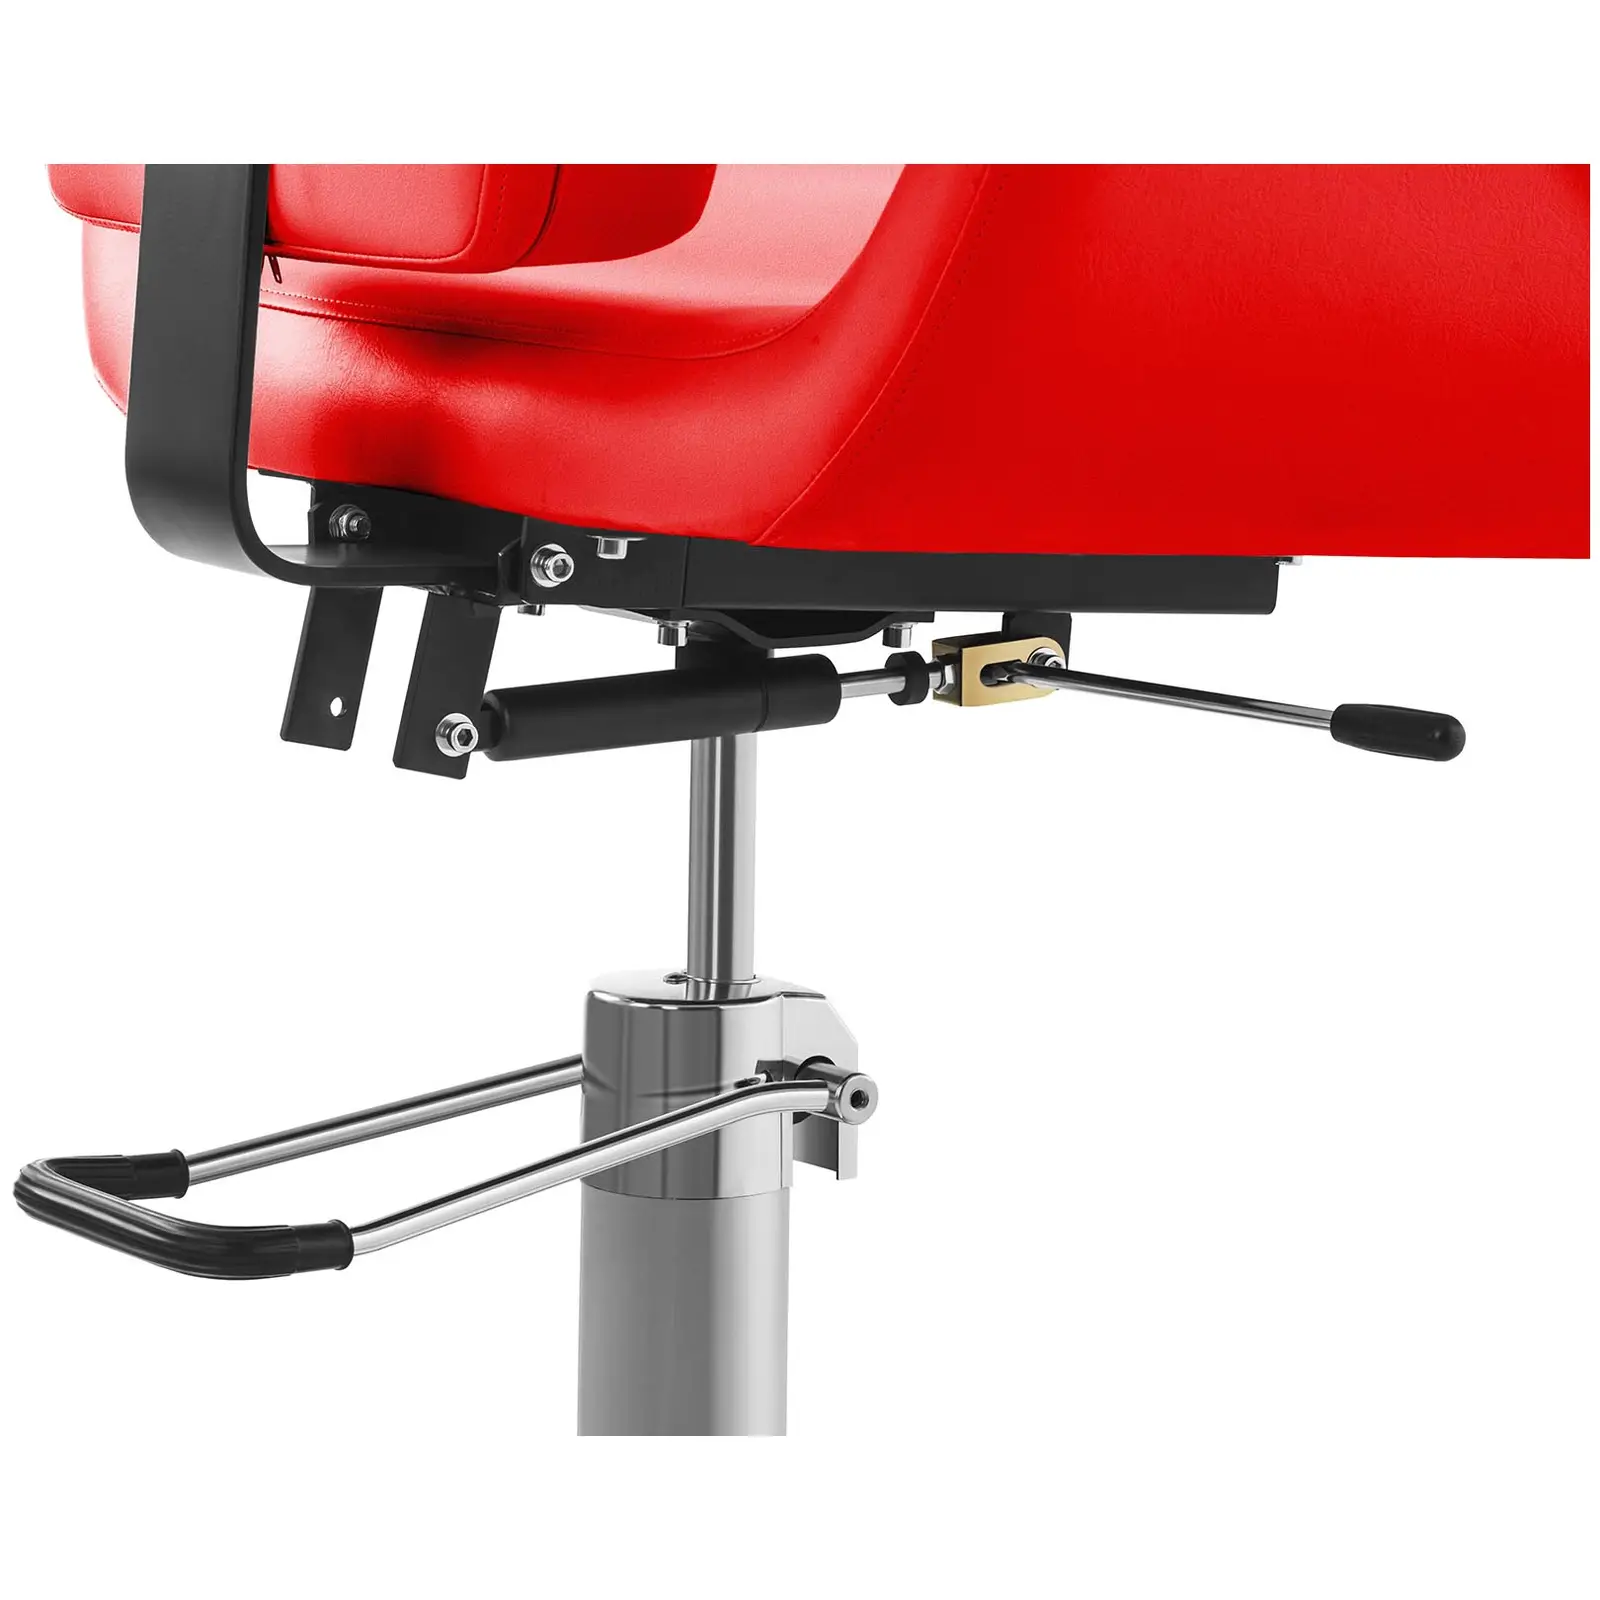 Factory second Salon Chair - Red